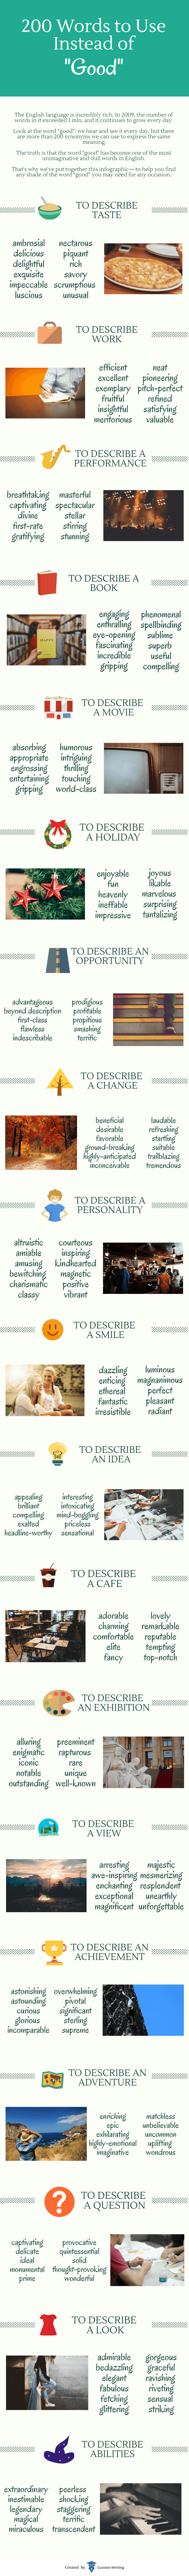 200 Words to use instead of ”good”.- example.